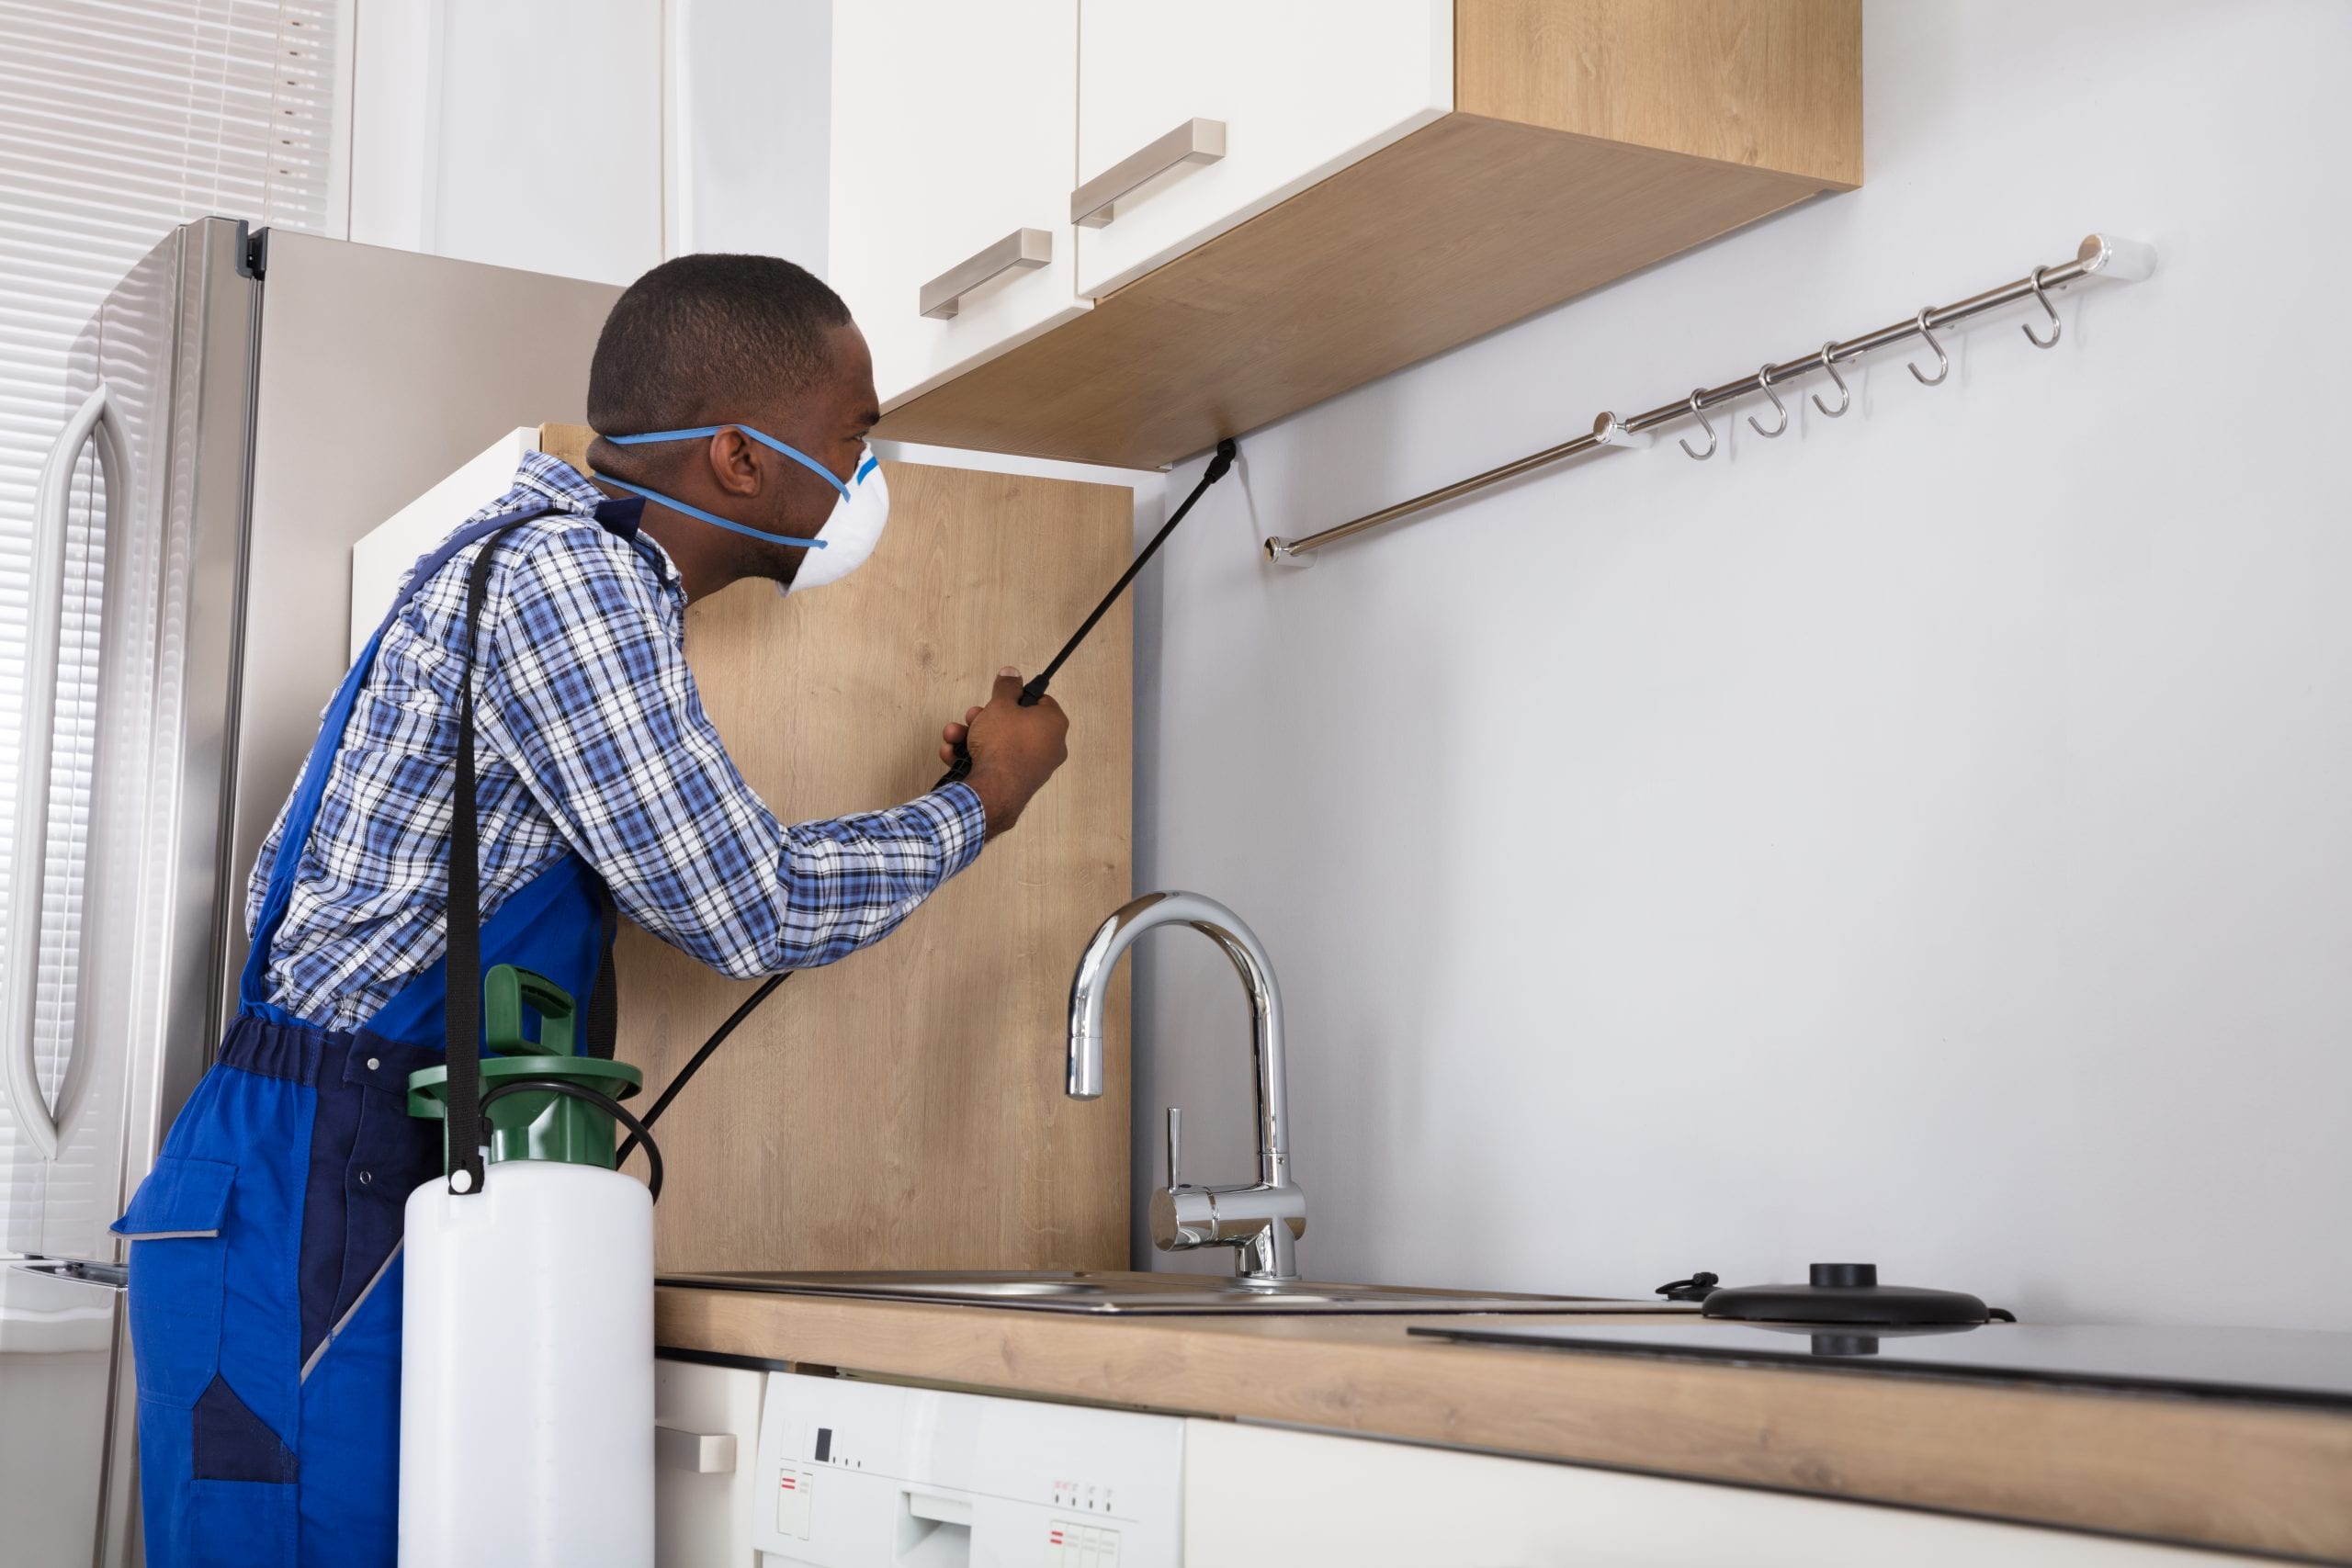 Pest control technician spraying in a kitchen for pests.